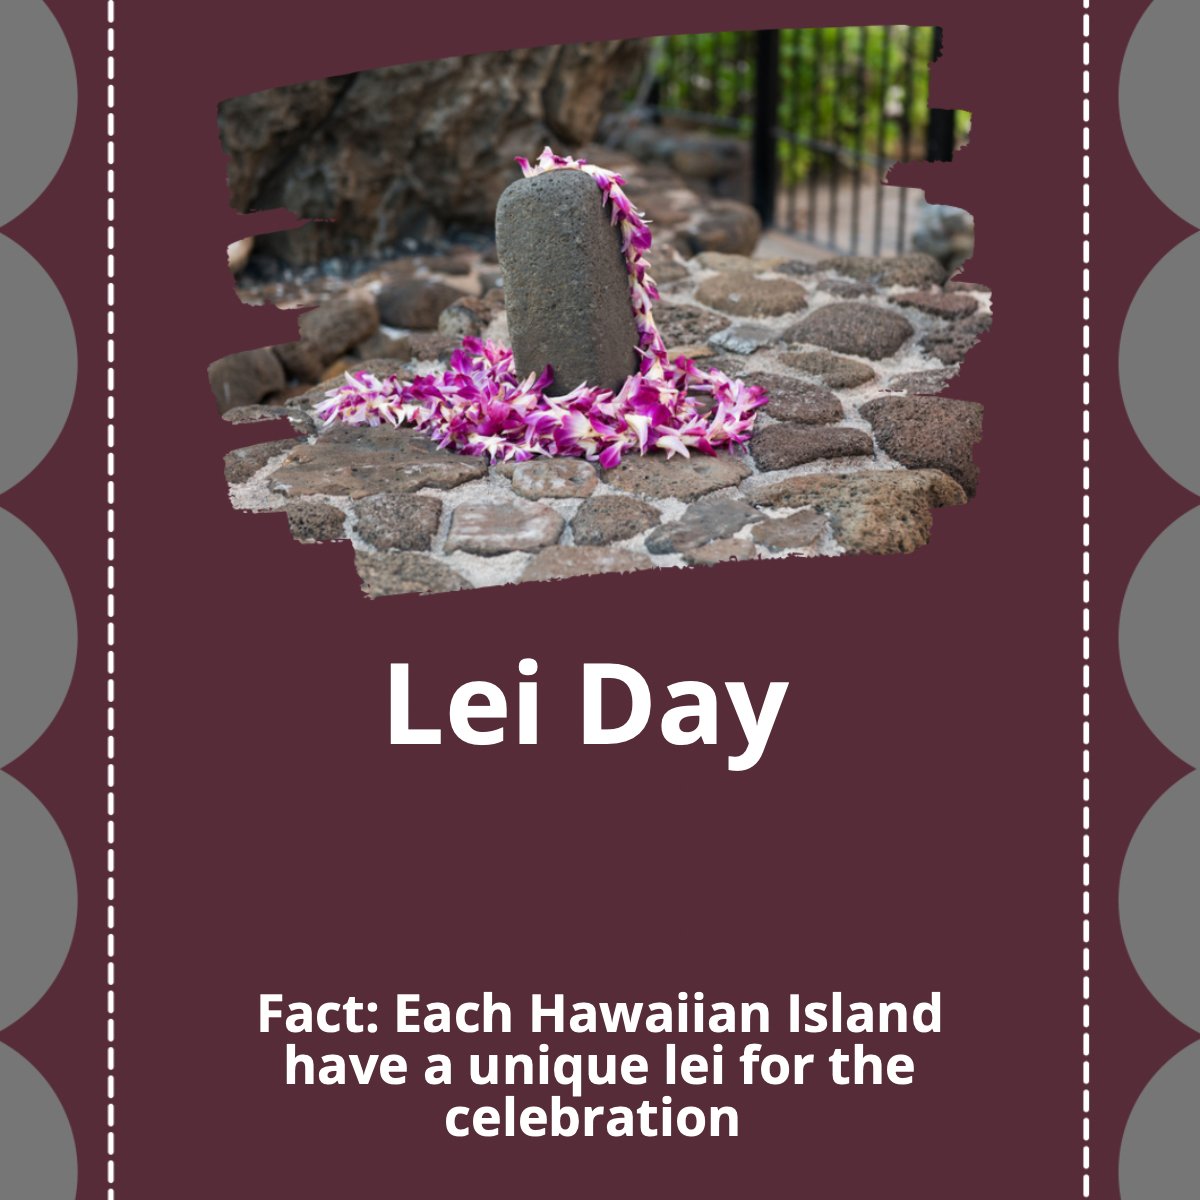 Happy Lei Day to all who celebrate 🙌!

Did you know? 🤔  Each Hawaiian island has a unique lei for the celebration. 😱

#lei #day #hawaii #flowers #celebration #grey
 #mortgagerates #mortgagebroker #longislandrealestate #realtor #nyrealtor #longislandrealtor